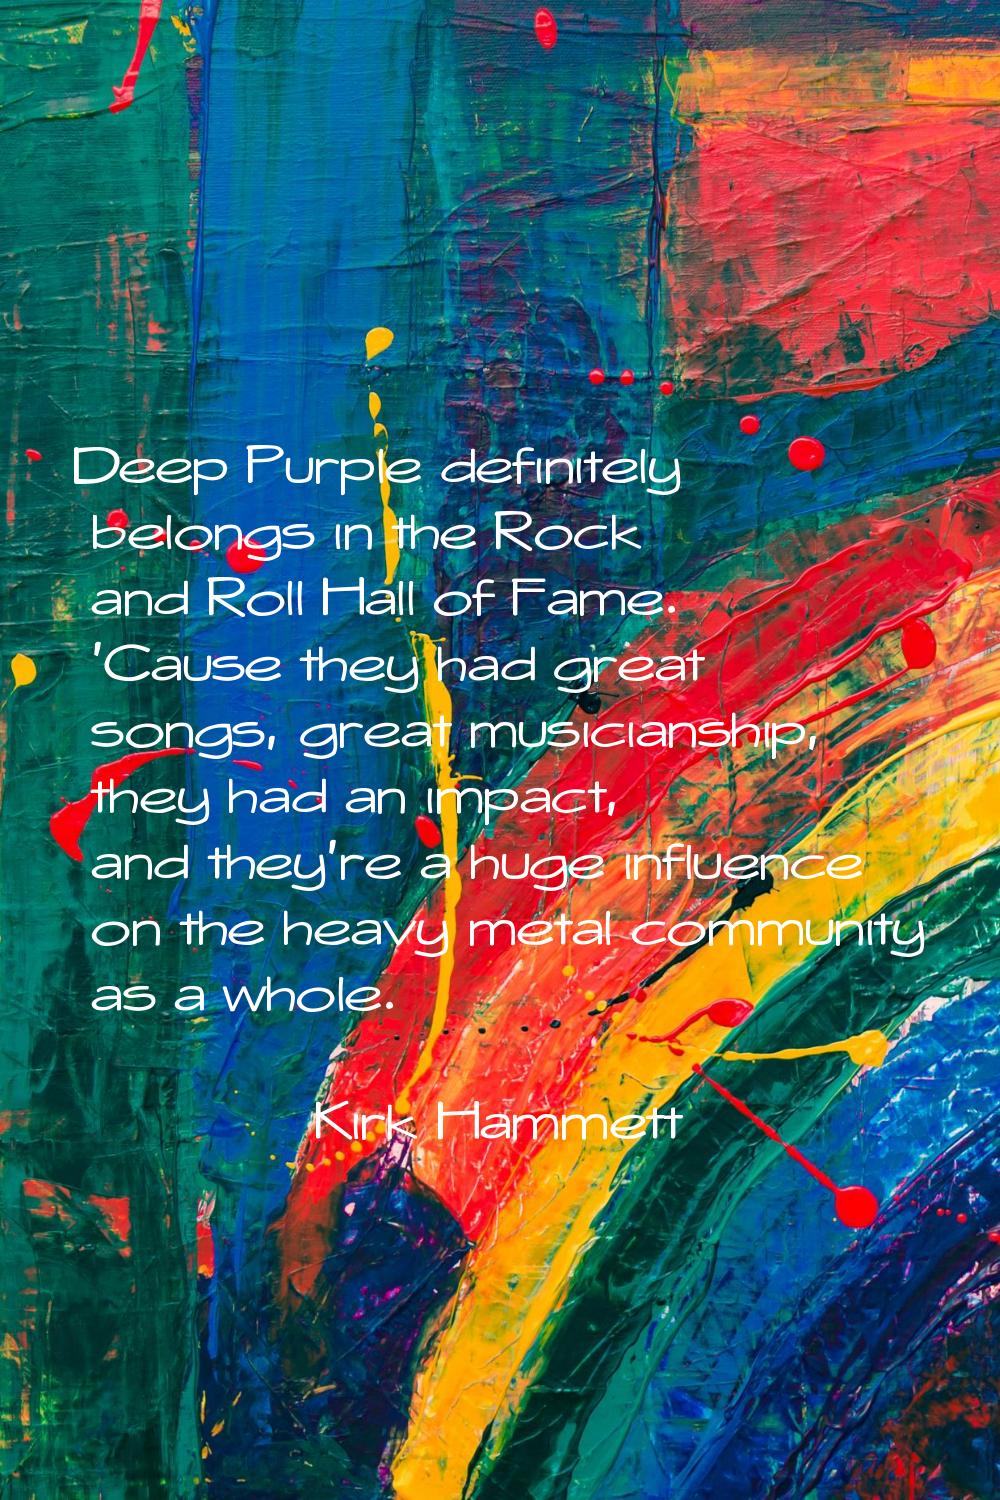 Deep Purple definitely belongs in the Rock and Roll Hall of Fame. 'Cause they had great songs, grea